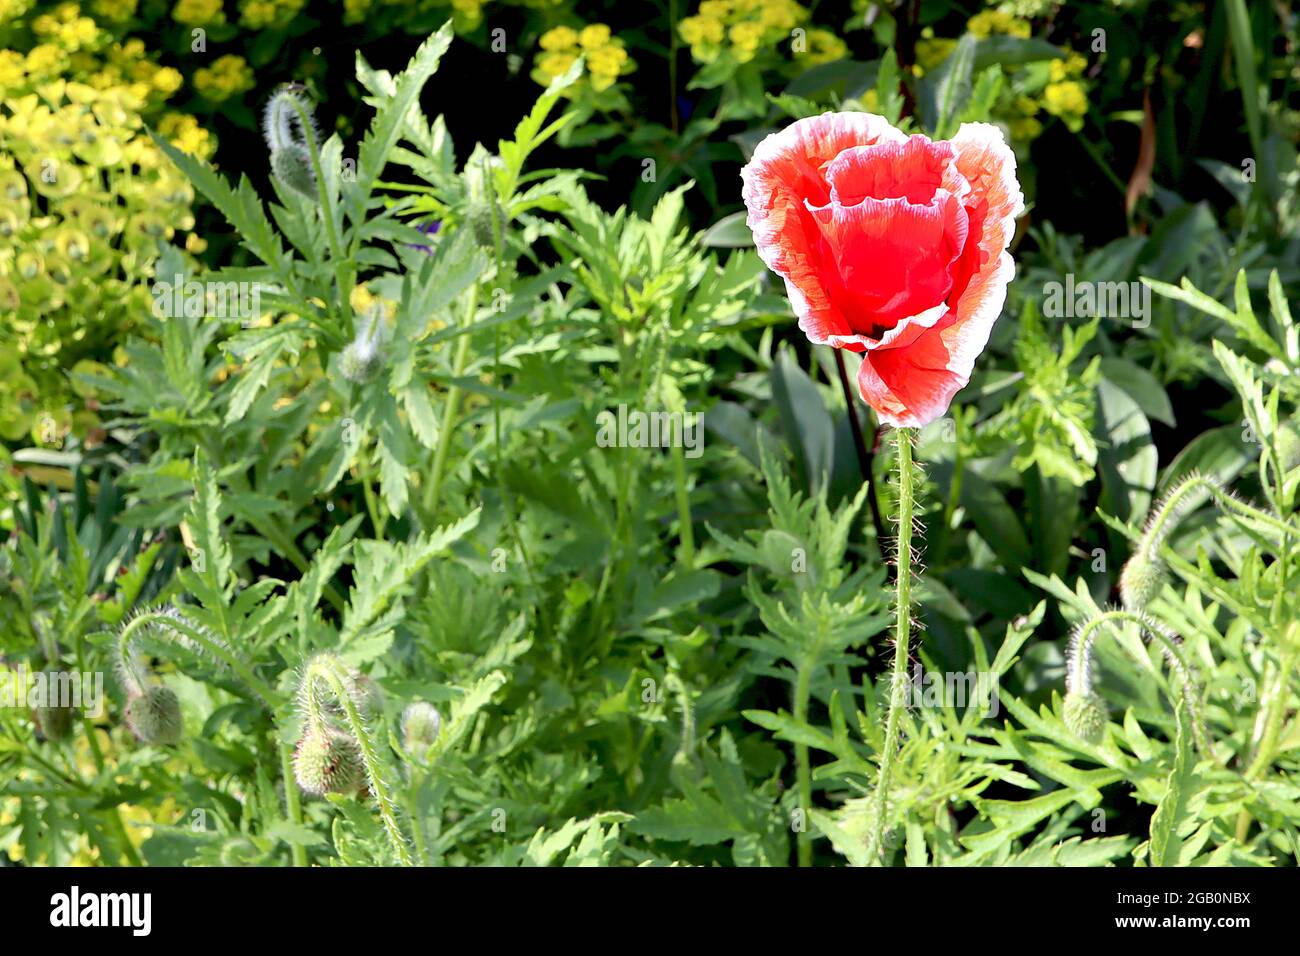 Papaver rhoeas ‘Dawn Chorus’ common poppy Dawn Chorus - red flowers with white margins and creased petals on hairy wiry stems, June, England, UK Stock Photo